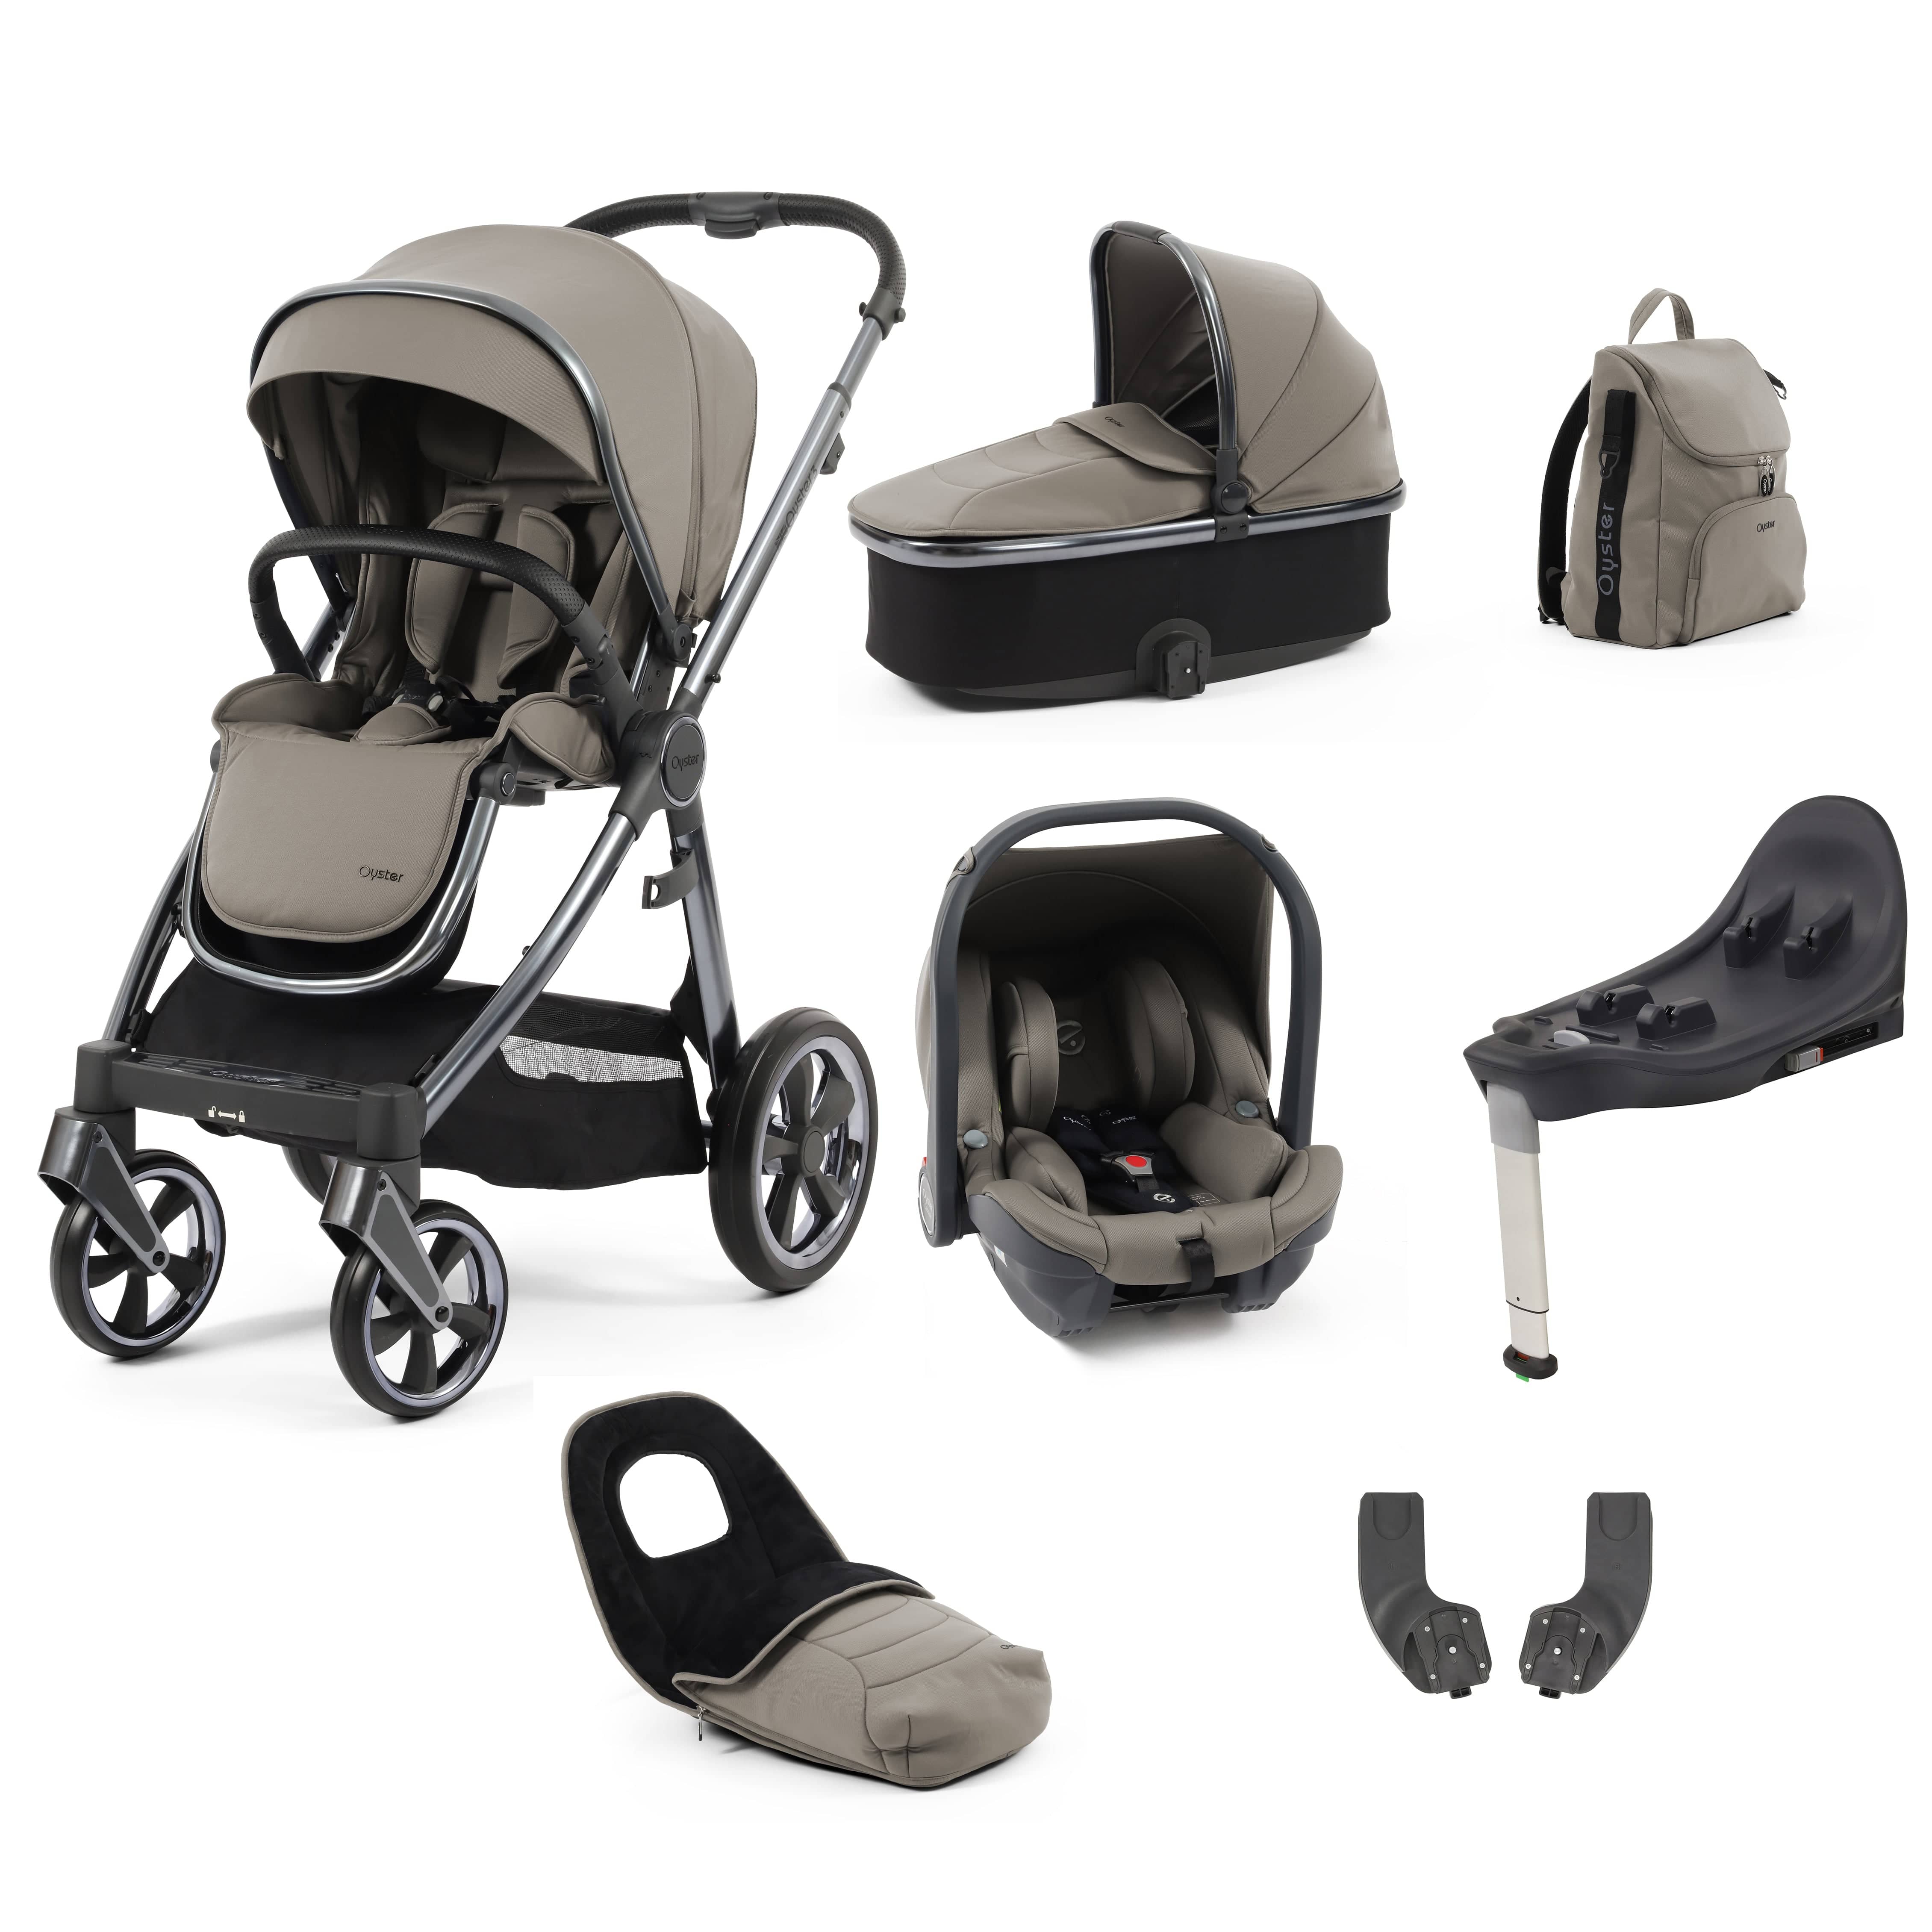 BabyStyle travel systems Babystyle Oyster 3 Luxury 7 Piece with Car Seat Bundle in Stone 14776-STN